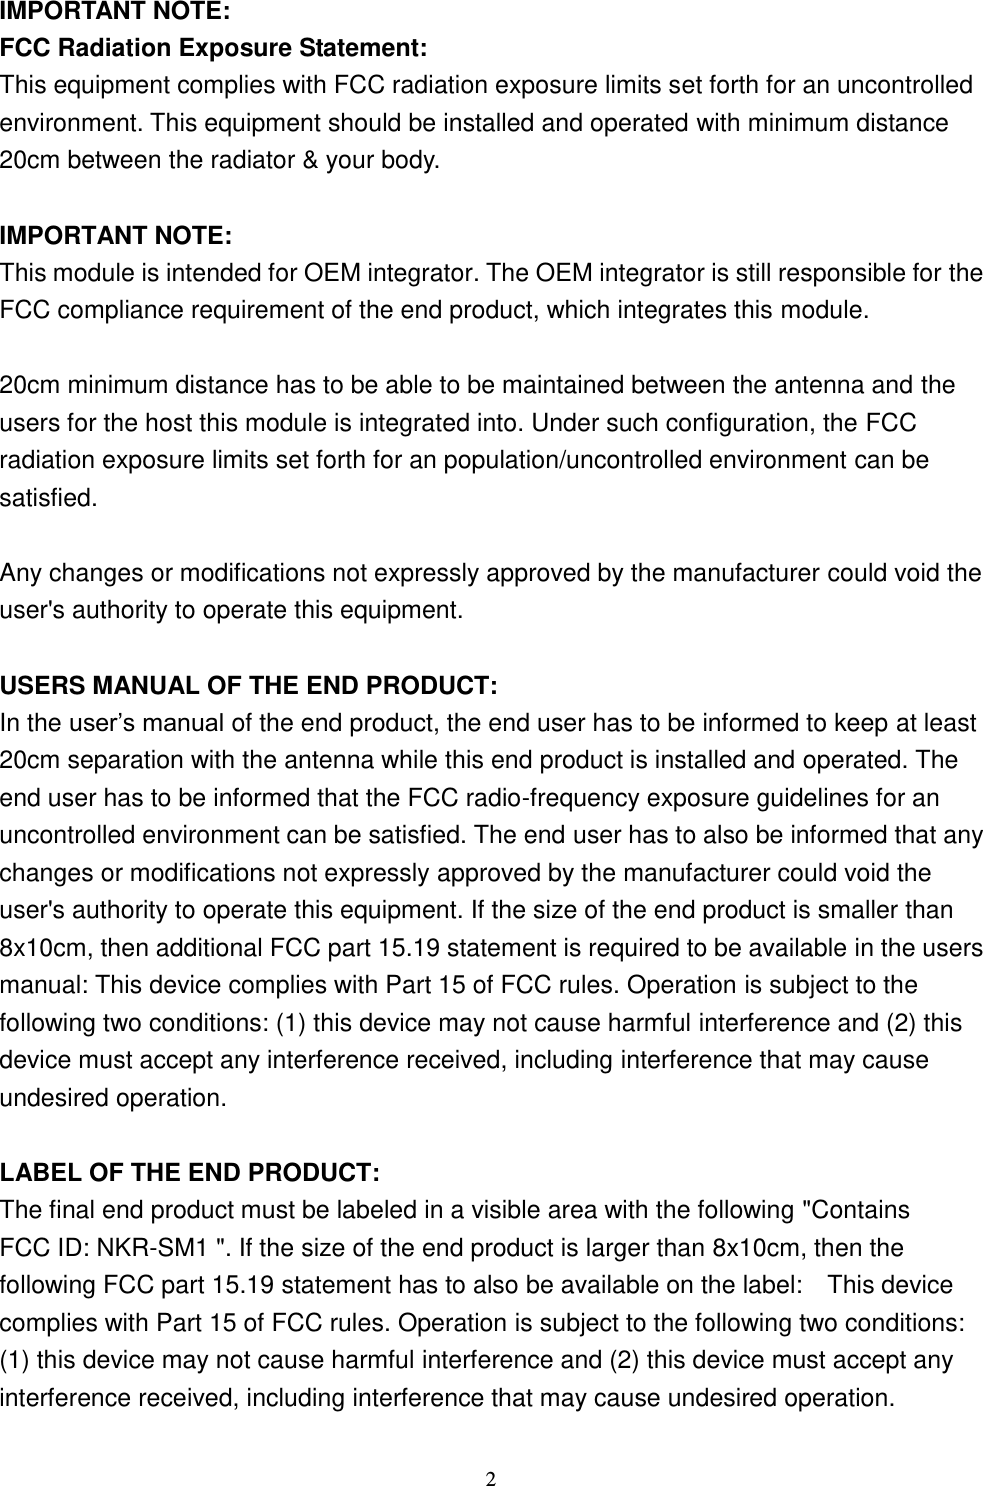  2 IMPORTANT NOTE: FCC Radiation Exposure Statement: This equipment complies with FCC radiation exposure limits set forth for an uncontrolled environment. This equipment should be installed and operated with minimum distance 20cm between the radiator &amp; your body.  IMPORTANT NOTE: This module is intended for OEM integrator. The OEM integrator is still responsible for the FCC compliance requirement of the end product, which integrates this module.  20cm minimum distance has to be able to be maintained between the antenna and the users for the host this module is integrated into. Under such configuration, the FCC radiation exposure limits set forth for an population/uncontrolled environment can be satisfied.    Any changes or modifications not expressly approved by the manufacturer could void the user&apos;s authority to operate this equipment.  USERS MANUAL OF THE END PRODUCT: In the user’s manual of the end product, the end user has to be informed to keep at least 20cm separation with the antenna while this end product is installed and operated. The end user has to be informed that the FCC radio-frequency exposure guidelines for an uncontrolled environment can be satisfied. The end user has to also be informed that any changes or modifications not expressly approved by the manufacturer could void the user&apos;s authority to operate this equipment. If the size of the end product is smaller than 8x10cm, then additional FCC part 15.19 statement is required to be available in the users manual: This device complies with Part 15 of FCC rules. Operation is subject to the following two conditions: (1) this device may not cause harmful interference and (2) this device must accept any interference received, including interference that may cause undesired operation.  LABEL OF THE END PRODUCT: The final end product must be labeled in a visible area with the following &quot;Contains FCC ID: NKR-SM1 &quot;. If the size of the end product is larger than 8x10cm, then the following FCC part 15.19 statement has to also be available on the label:    This device complies with Part 15 of FCC rules. Operation is subject to the following two conditions: (1) this device may not cause harmful interference and (2) this device must accept any interference received, including interference that may cause undesired operation. 